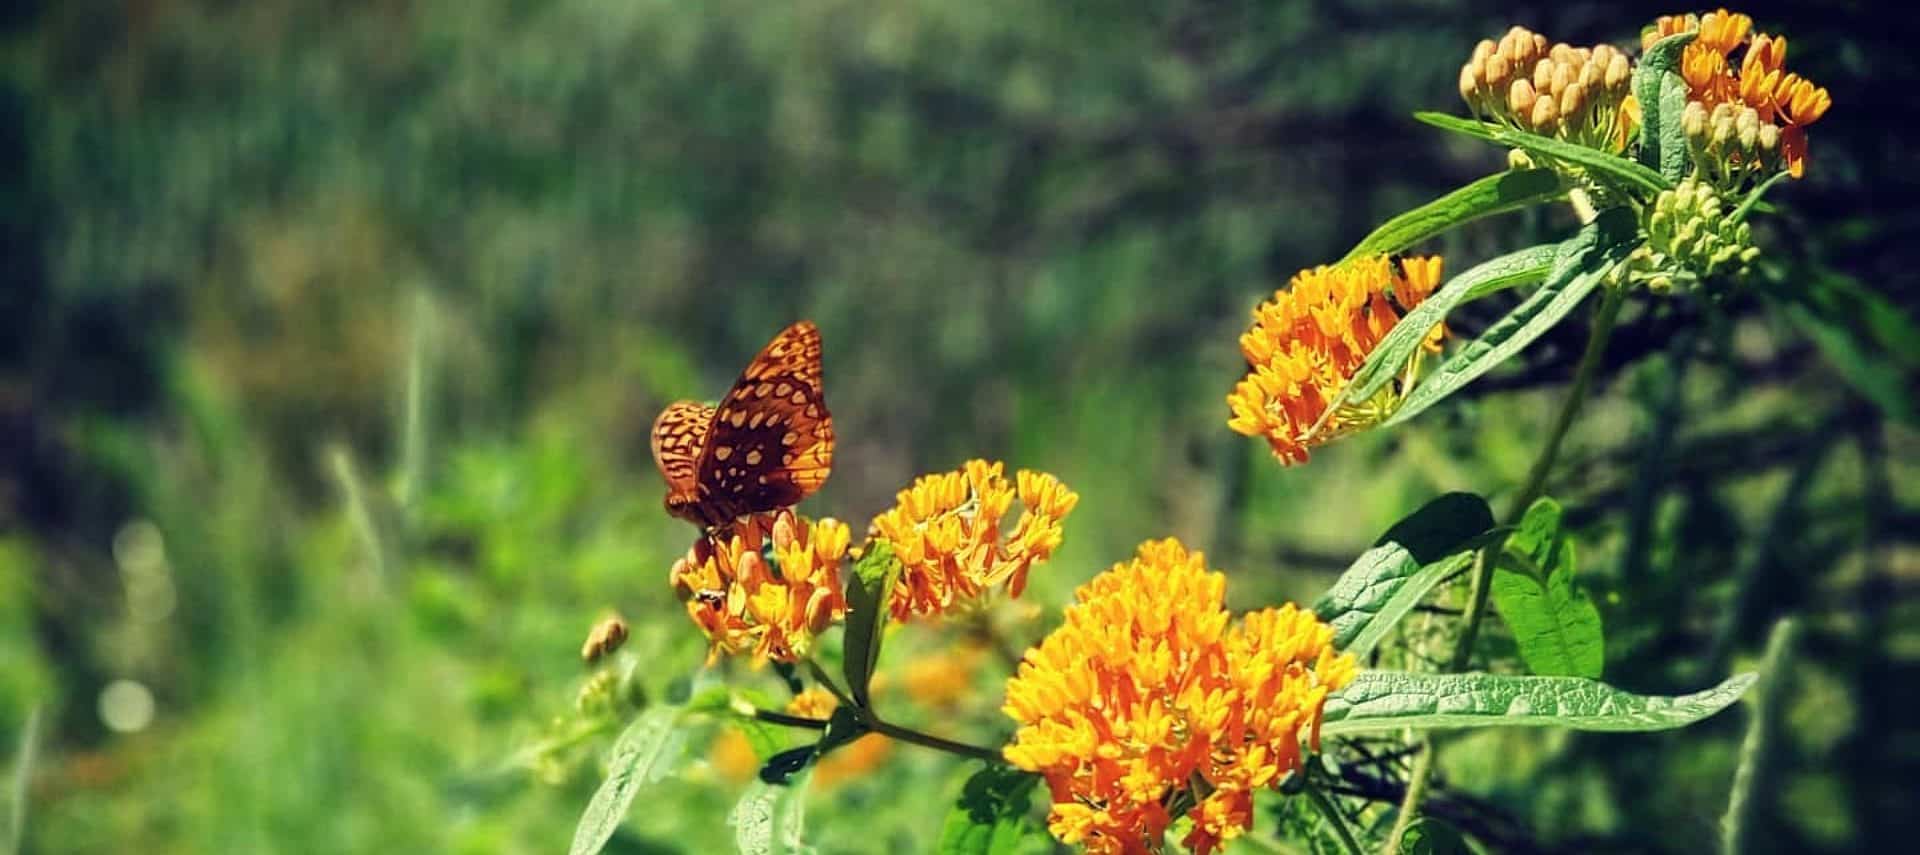 Single brown butterfly on a group of yellow flowers surrounded by trees